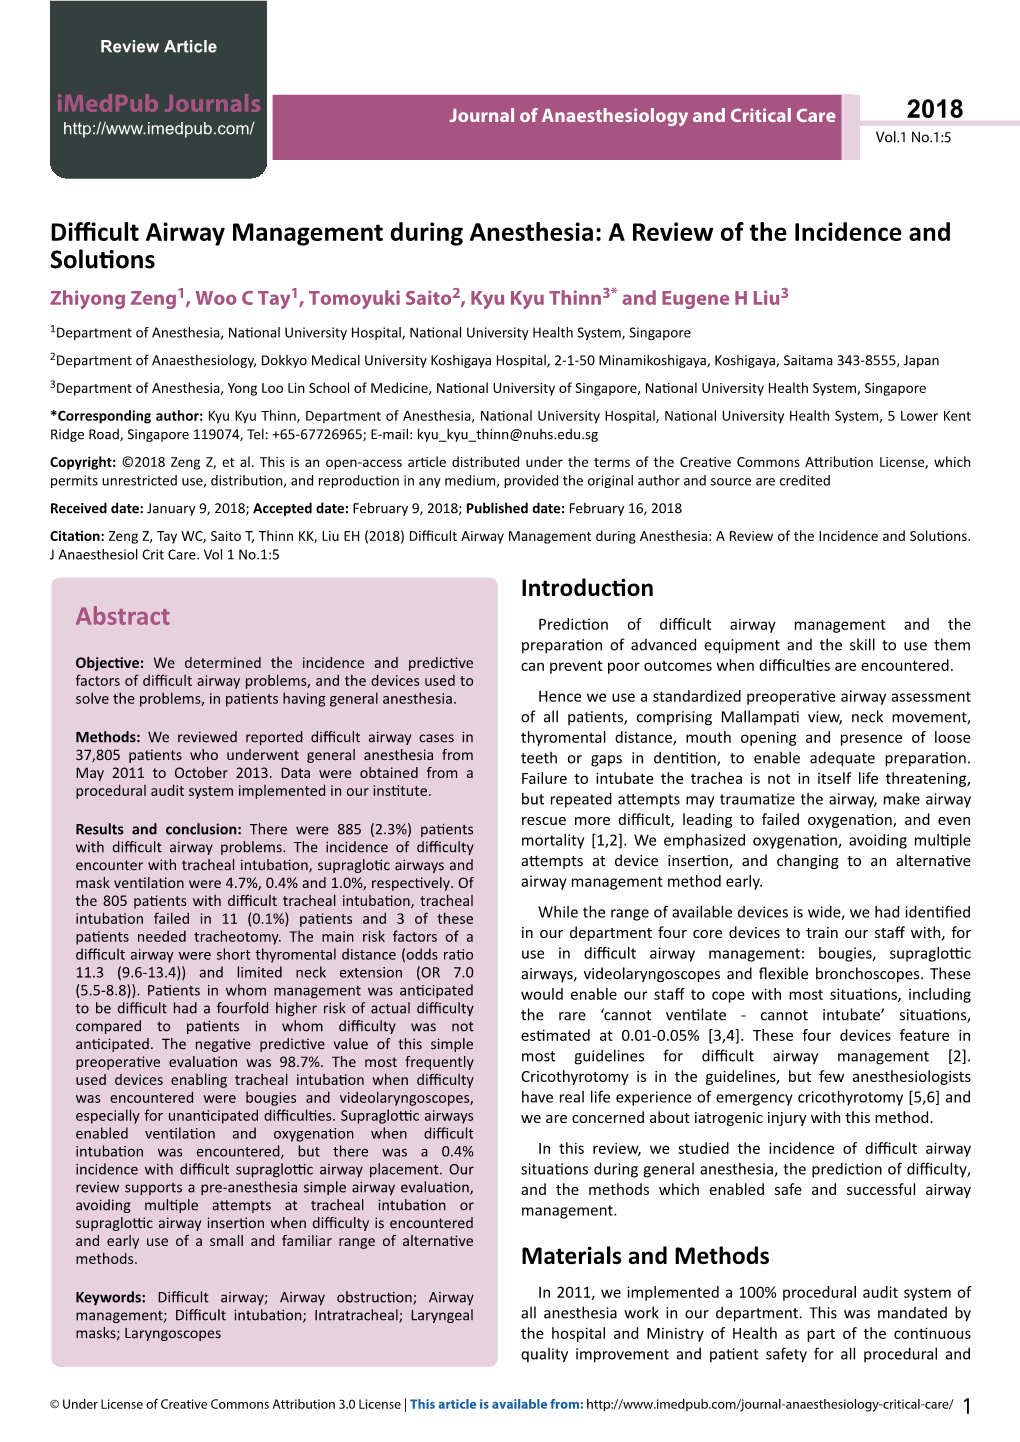 Difficult Airway Management During Anesthesia: a Review of the Incidence and Solutions Zhiyong Zeng1, Woo C Tay1, Tomoyuki Saito2, Kyu Kyu Thinn3* and Eugene H Liu3